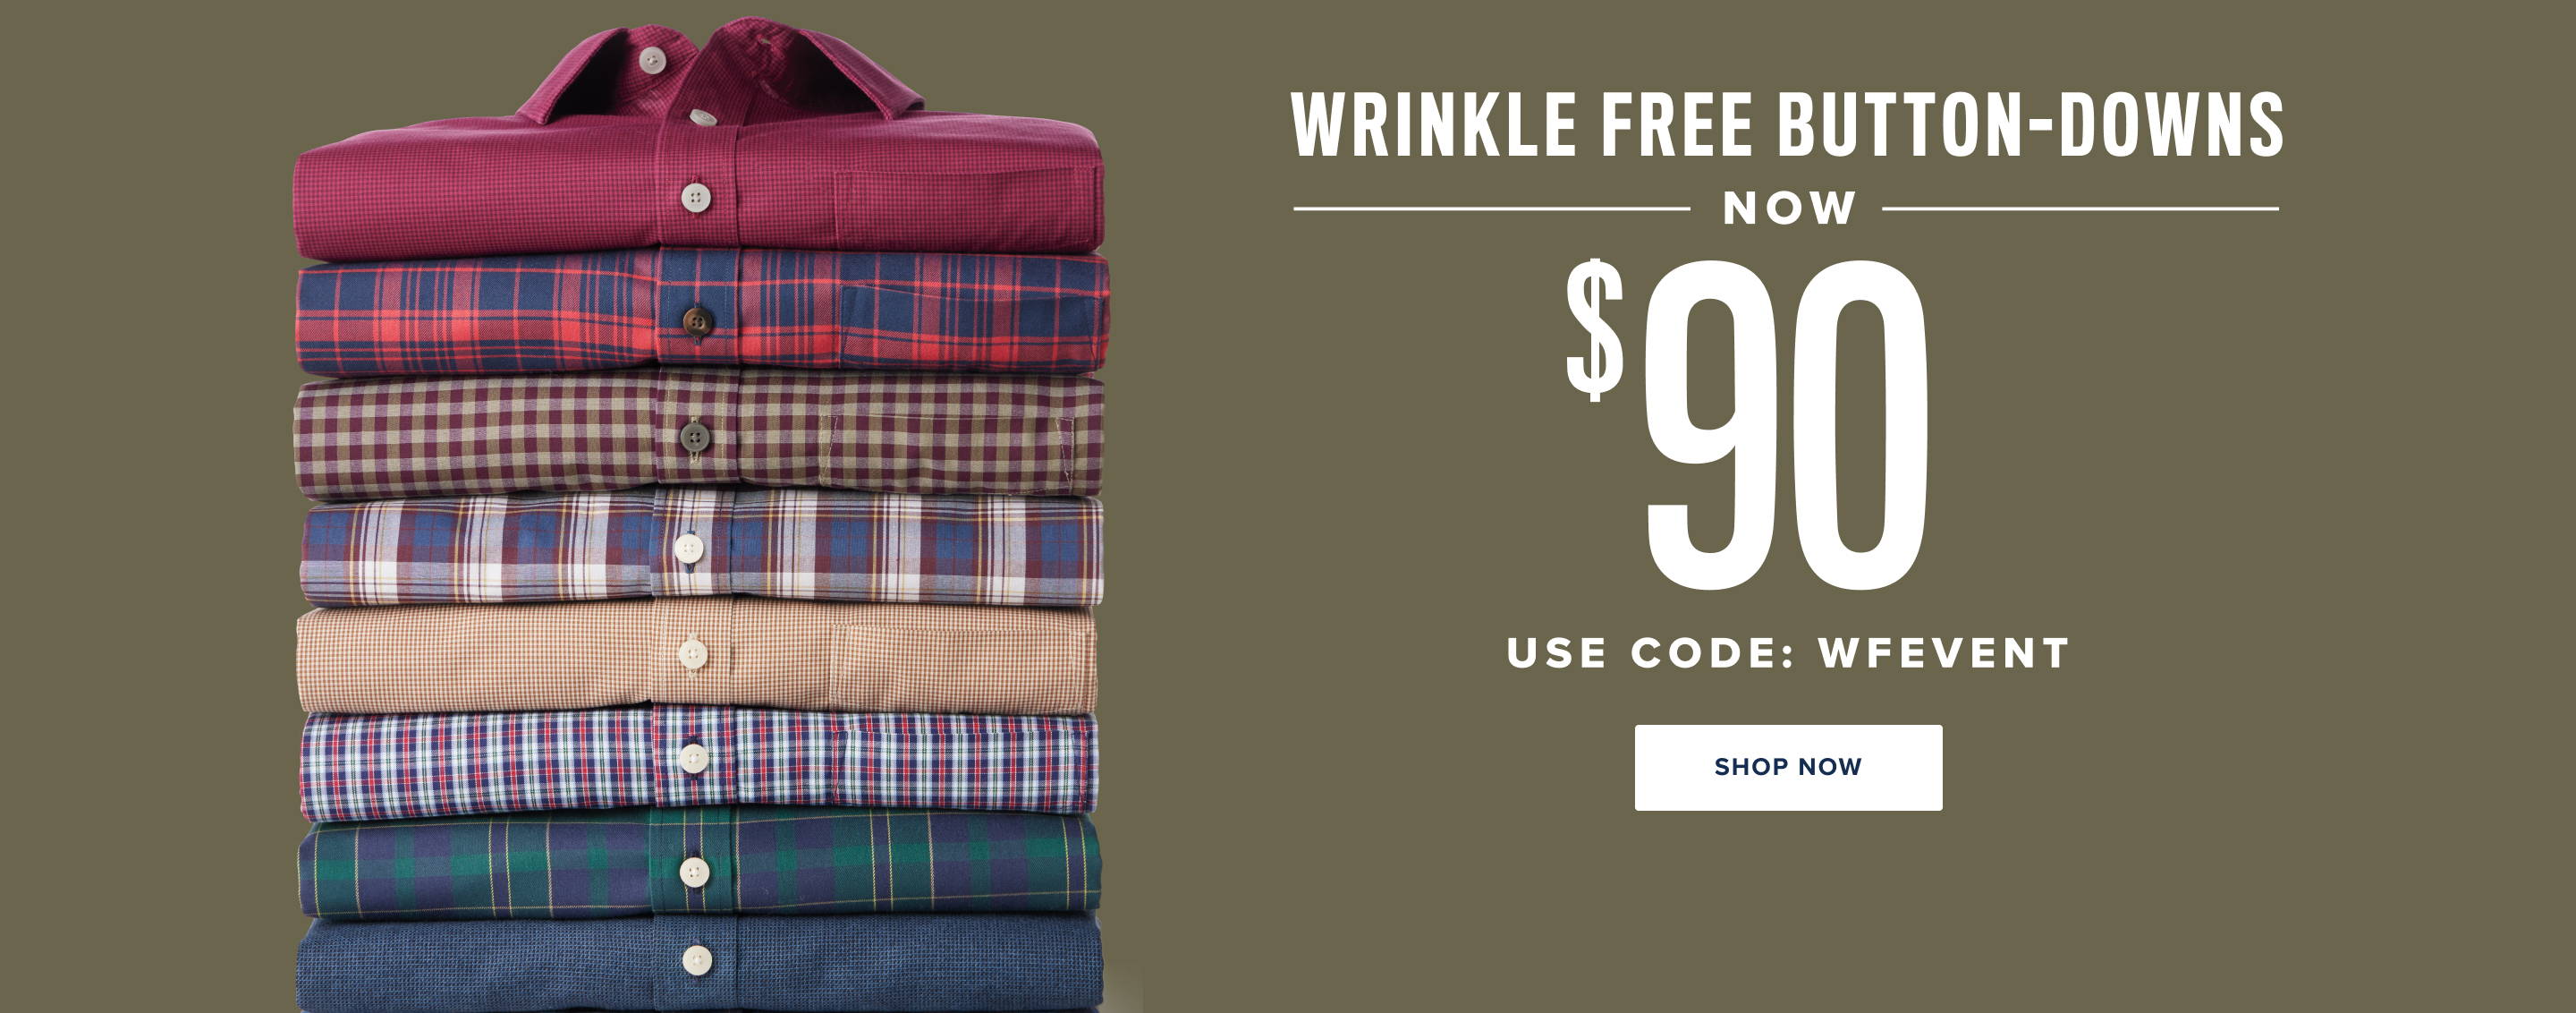 Wrinkle Free Button-Downs now $90. Use code: WFEVENT